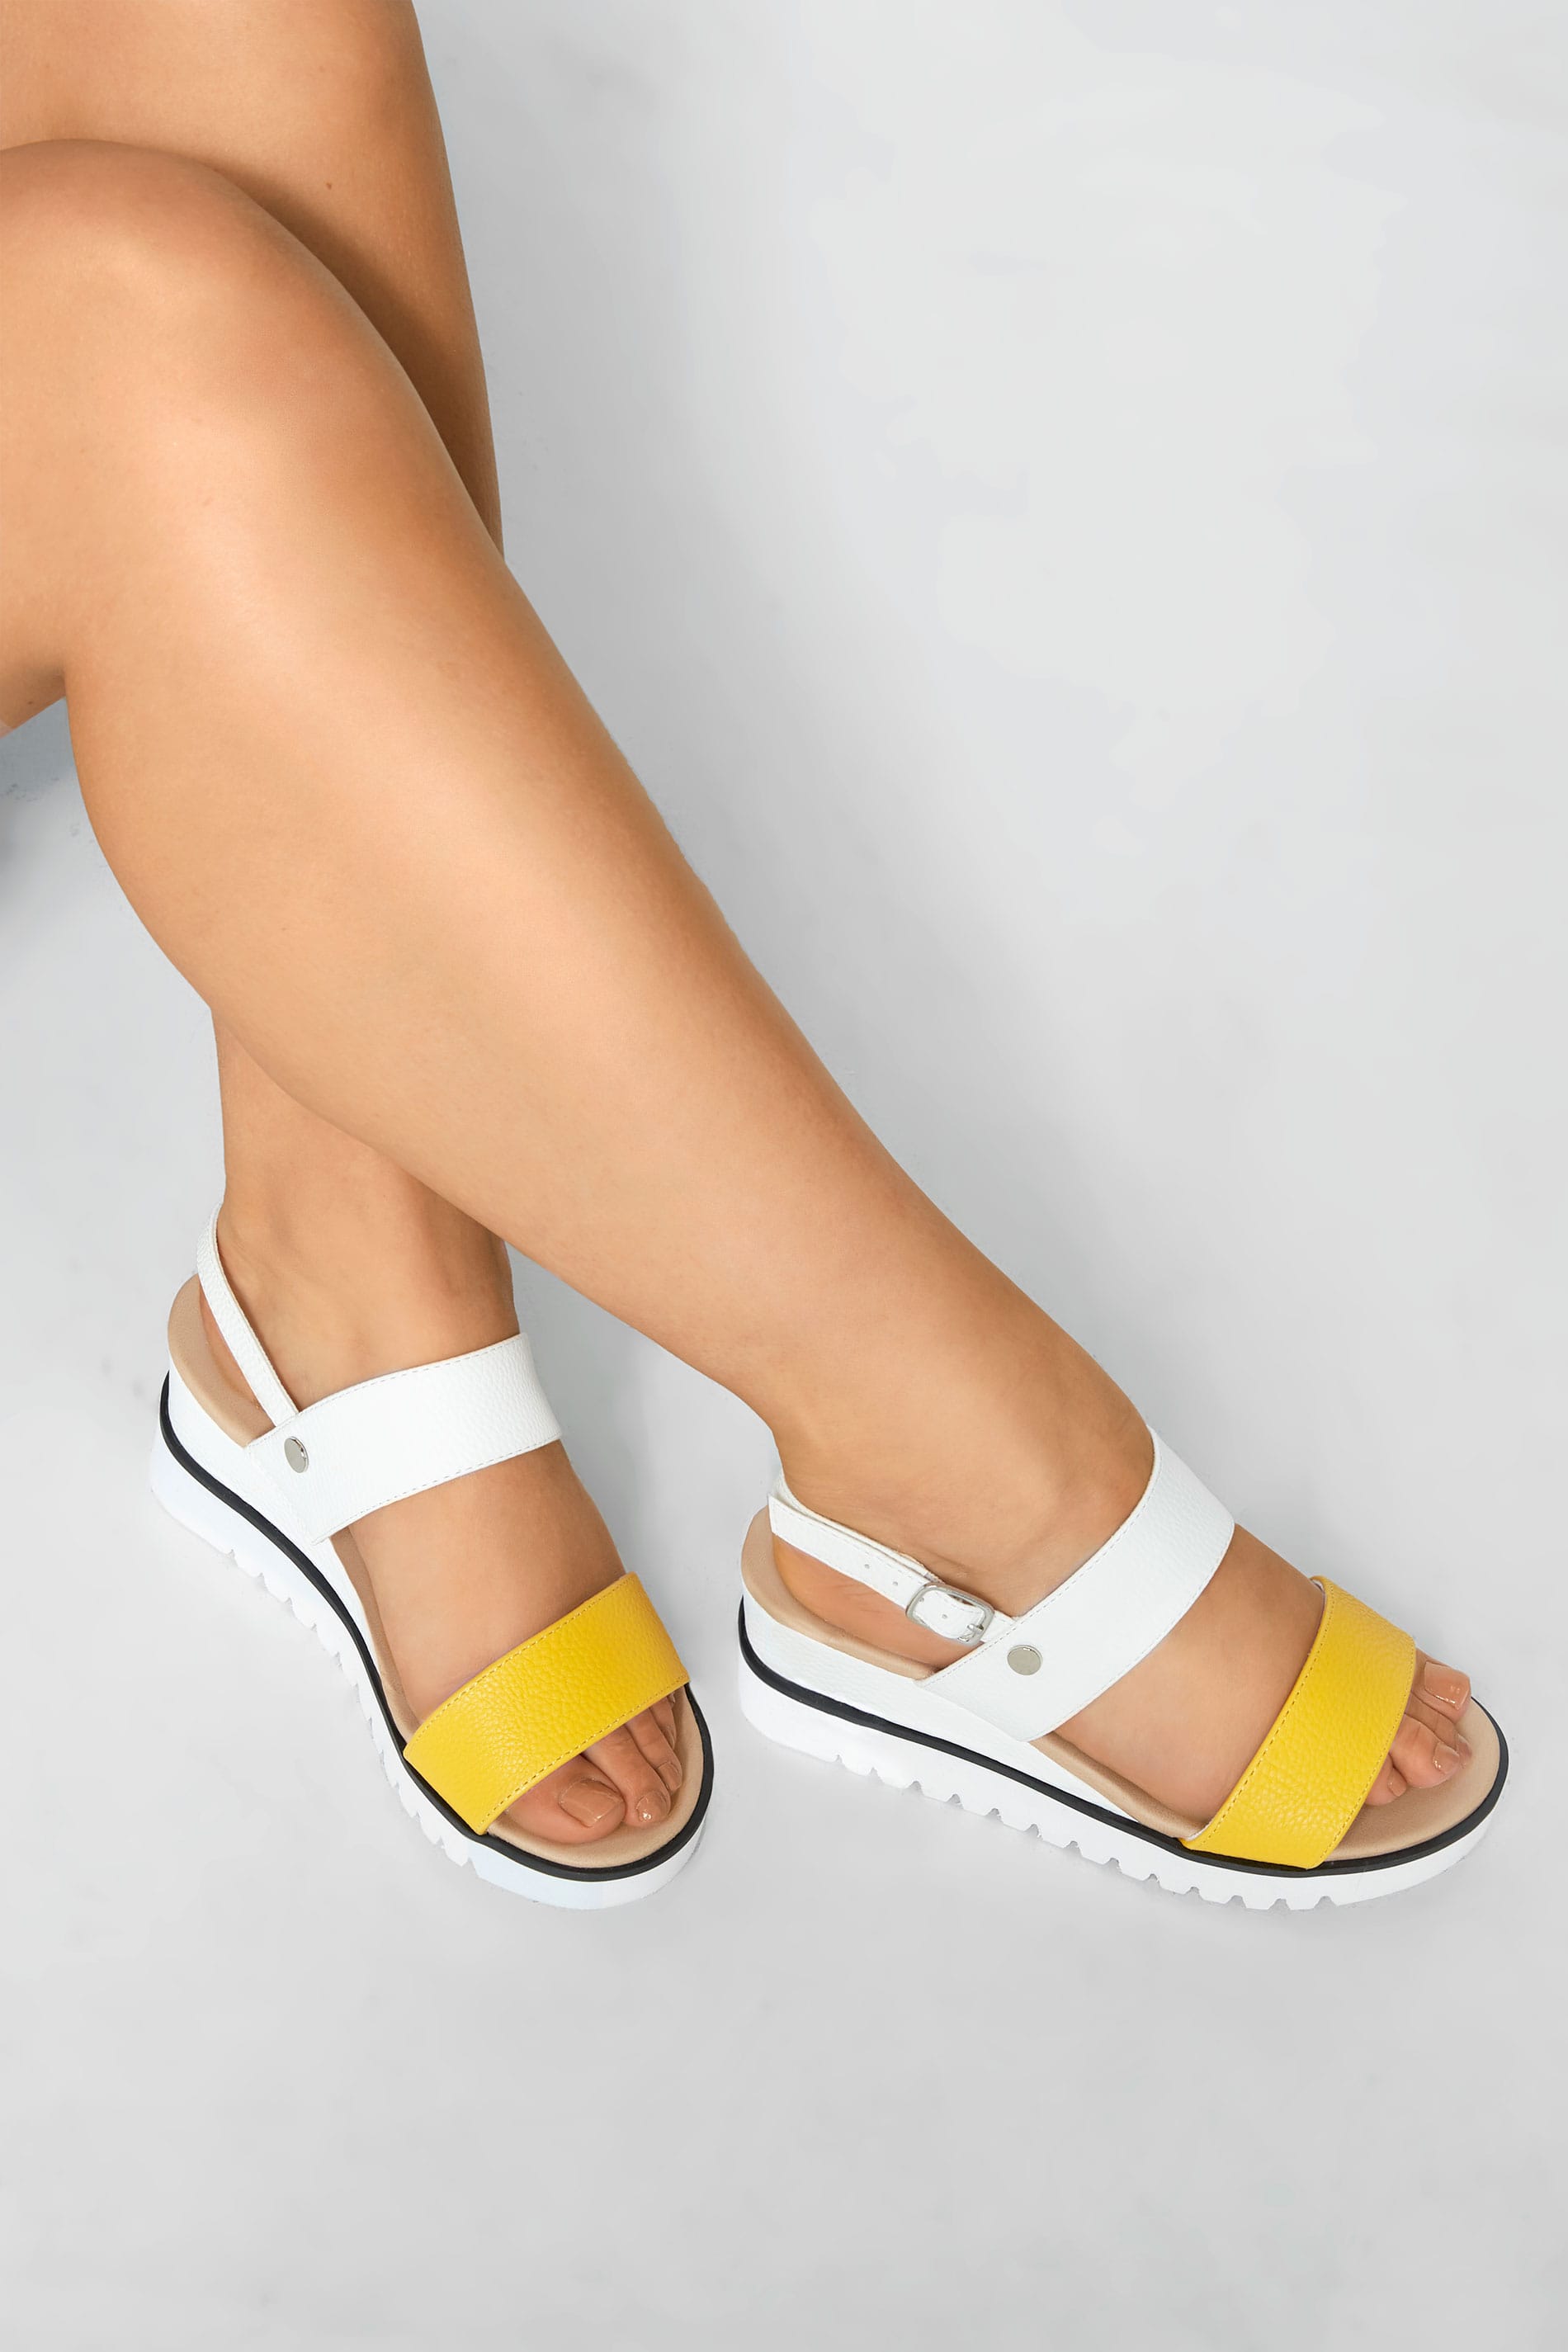 Yellow \u0026 White Sporty Wedge Sandals In 